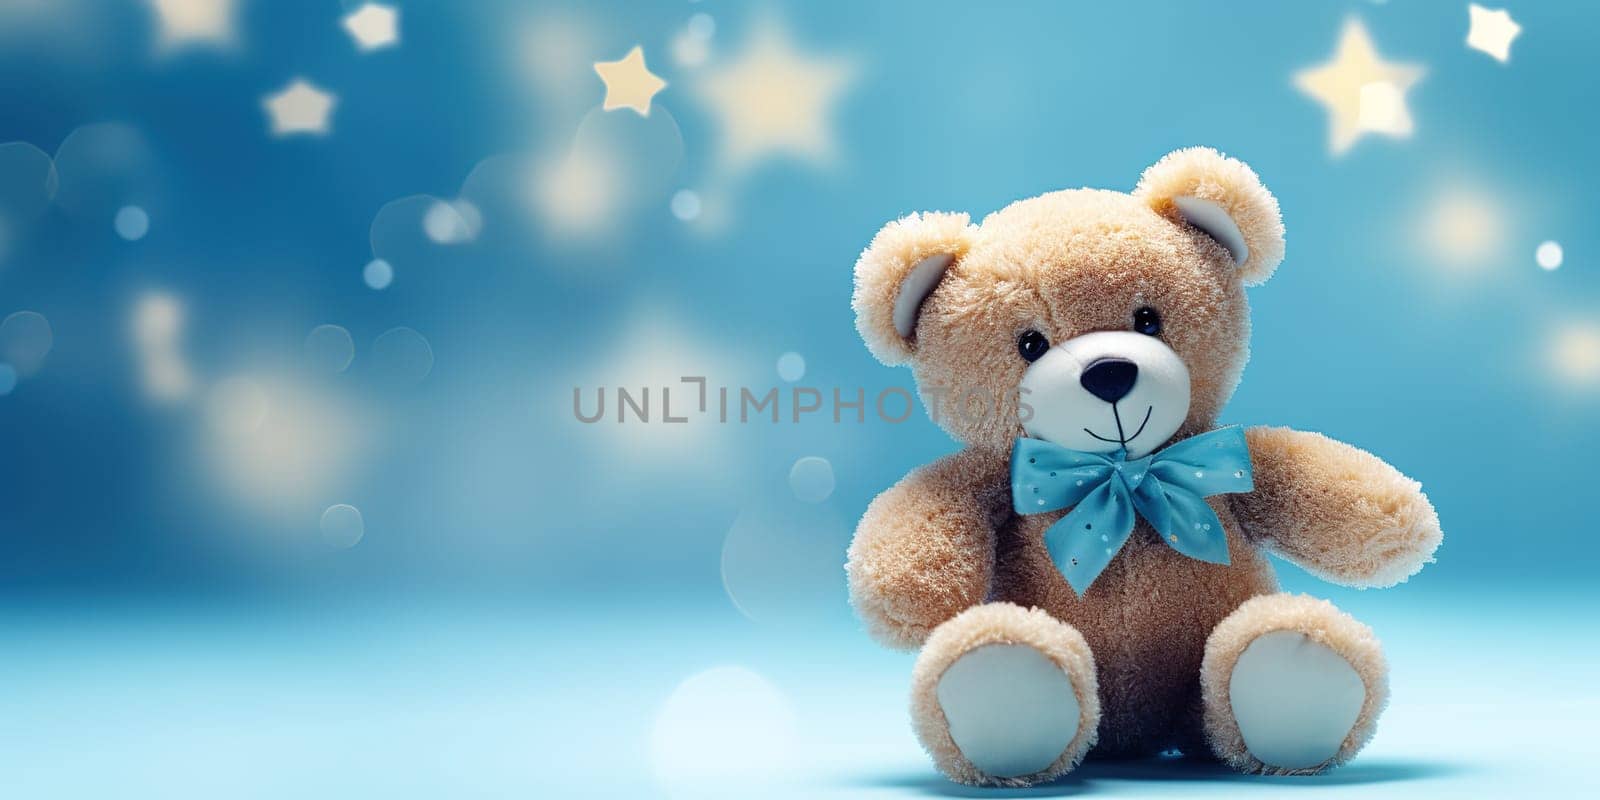 Cute, plush teddy bear on a light blue background with copy space